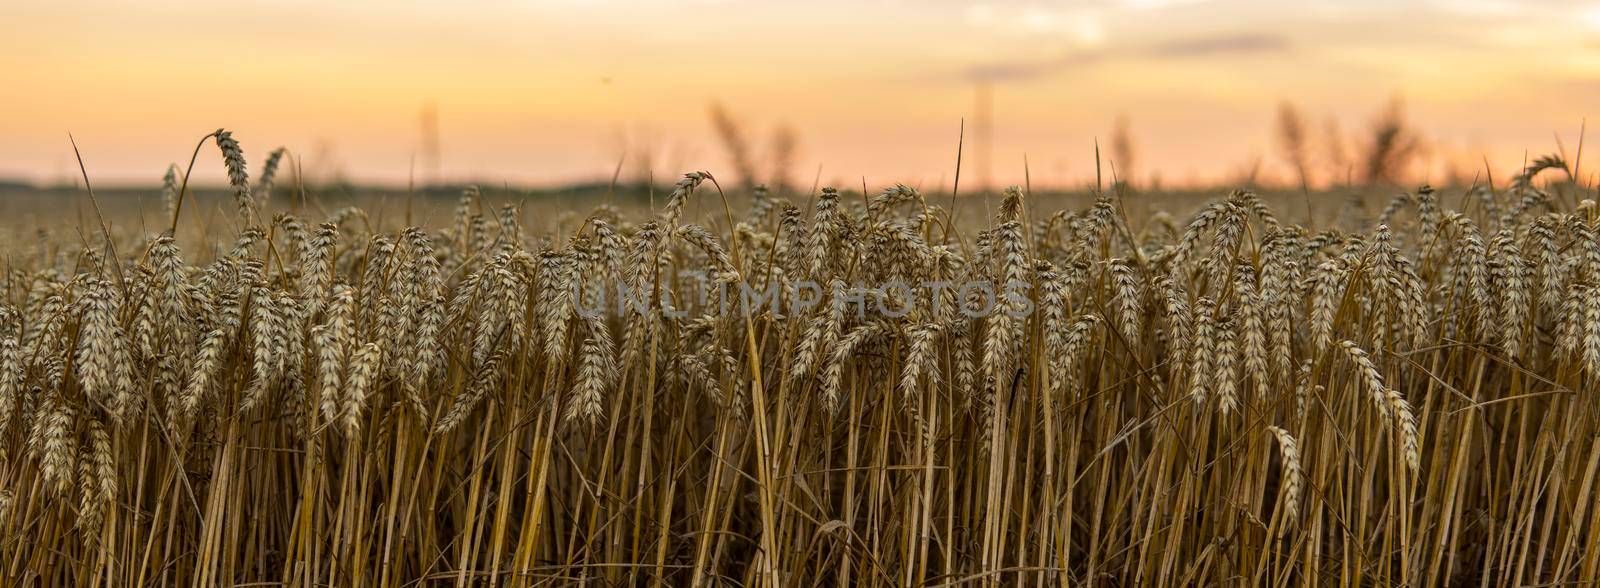 Golden wheat field in Ukraine. Ears of ripe yellow wheat against a bright sunset sky. by vovsht